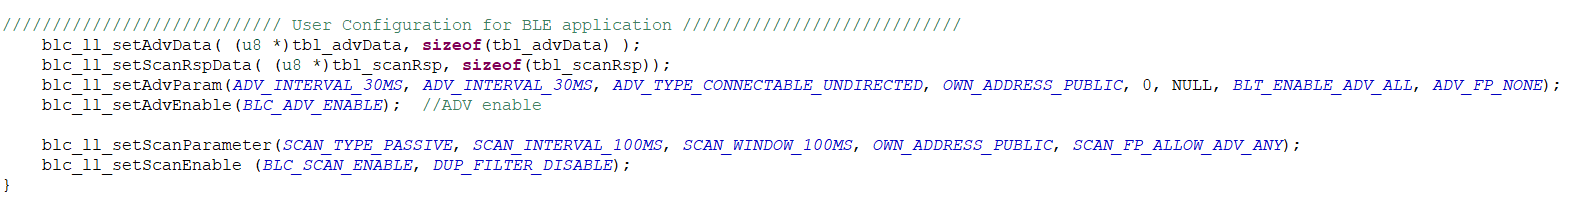 Configure advertising scanning parameters in the initialization